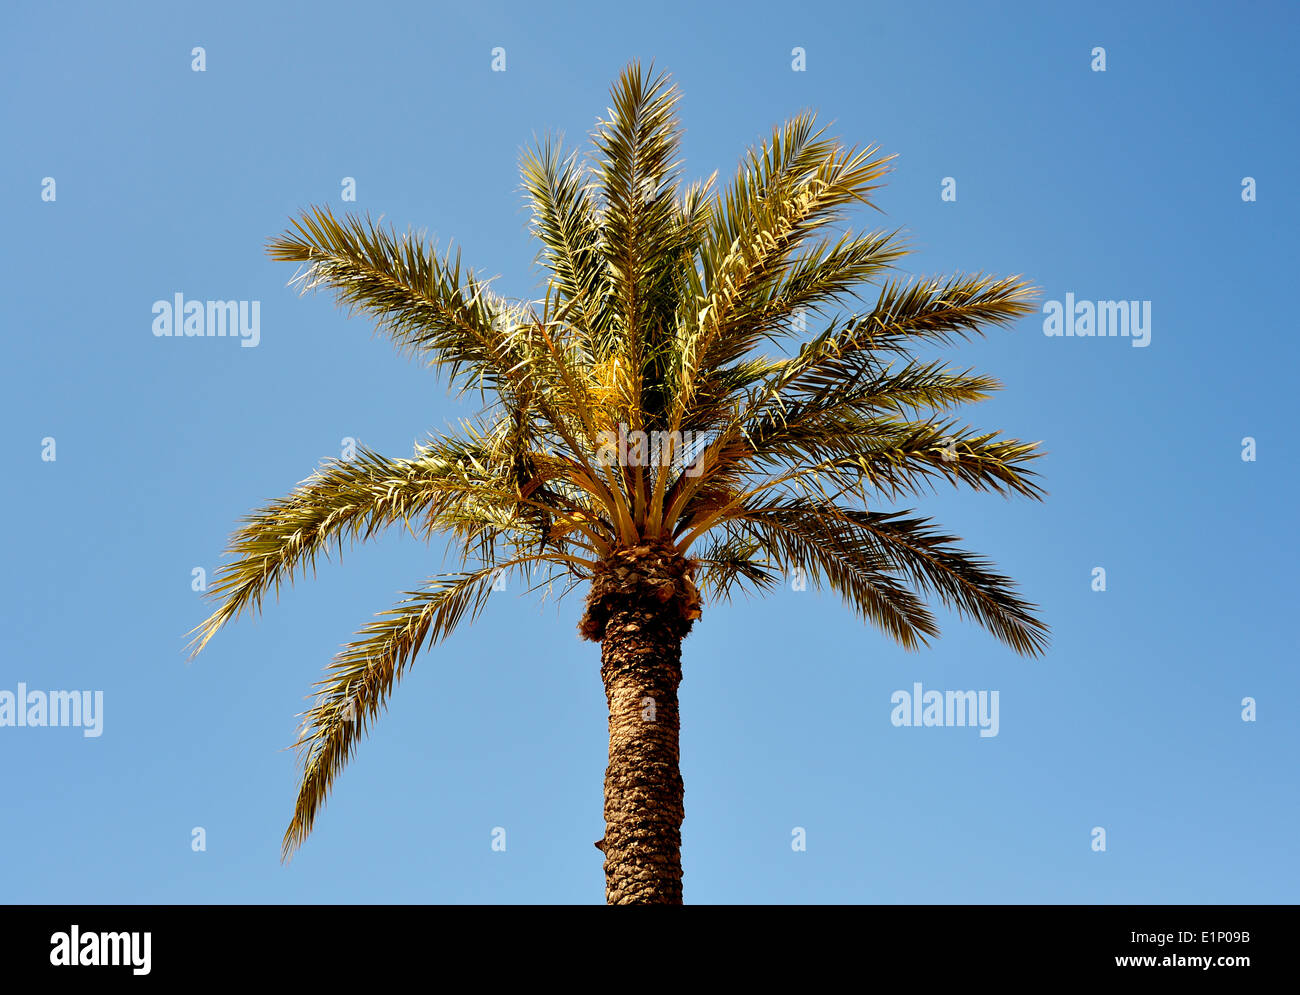 PALM TREE WITH A BLUE SKY Banque D'Images